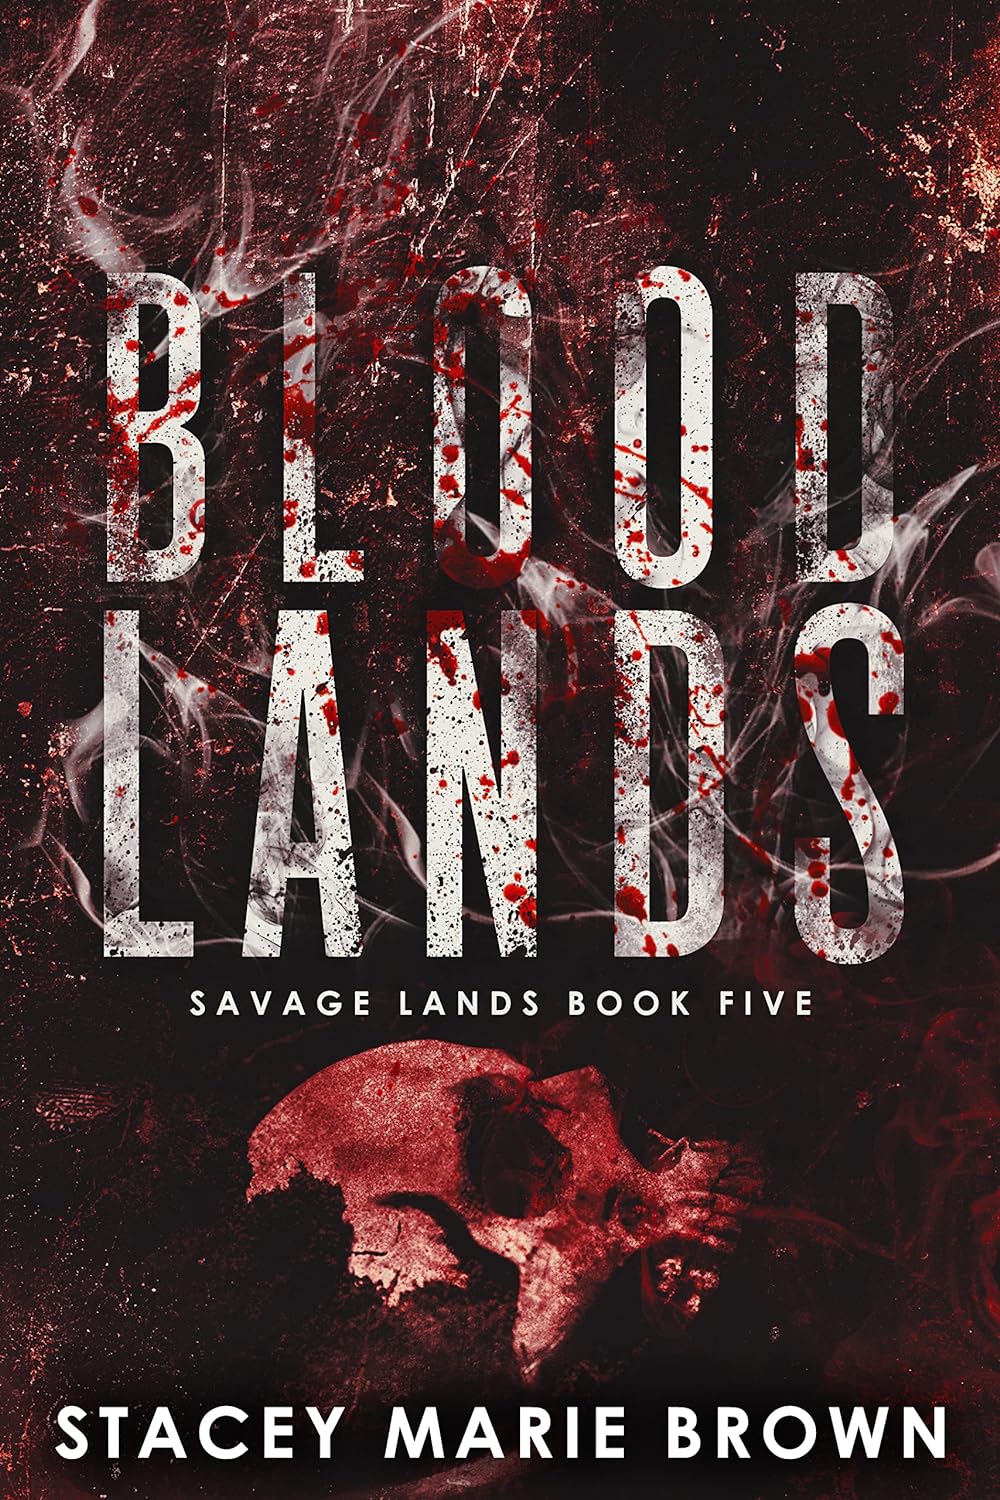 Savage Lands Series (Book 4 & 5) by Stacy Marie Brown